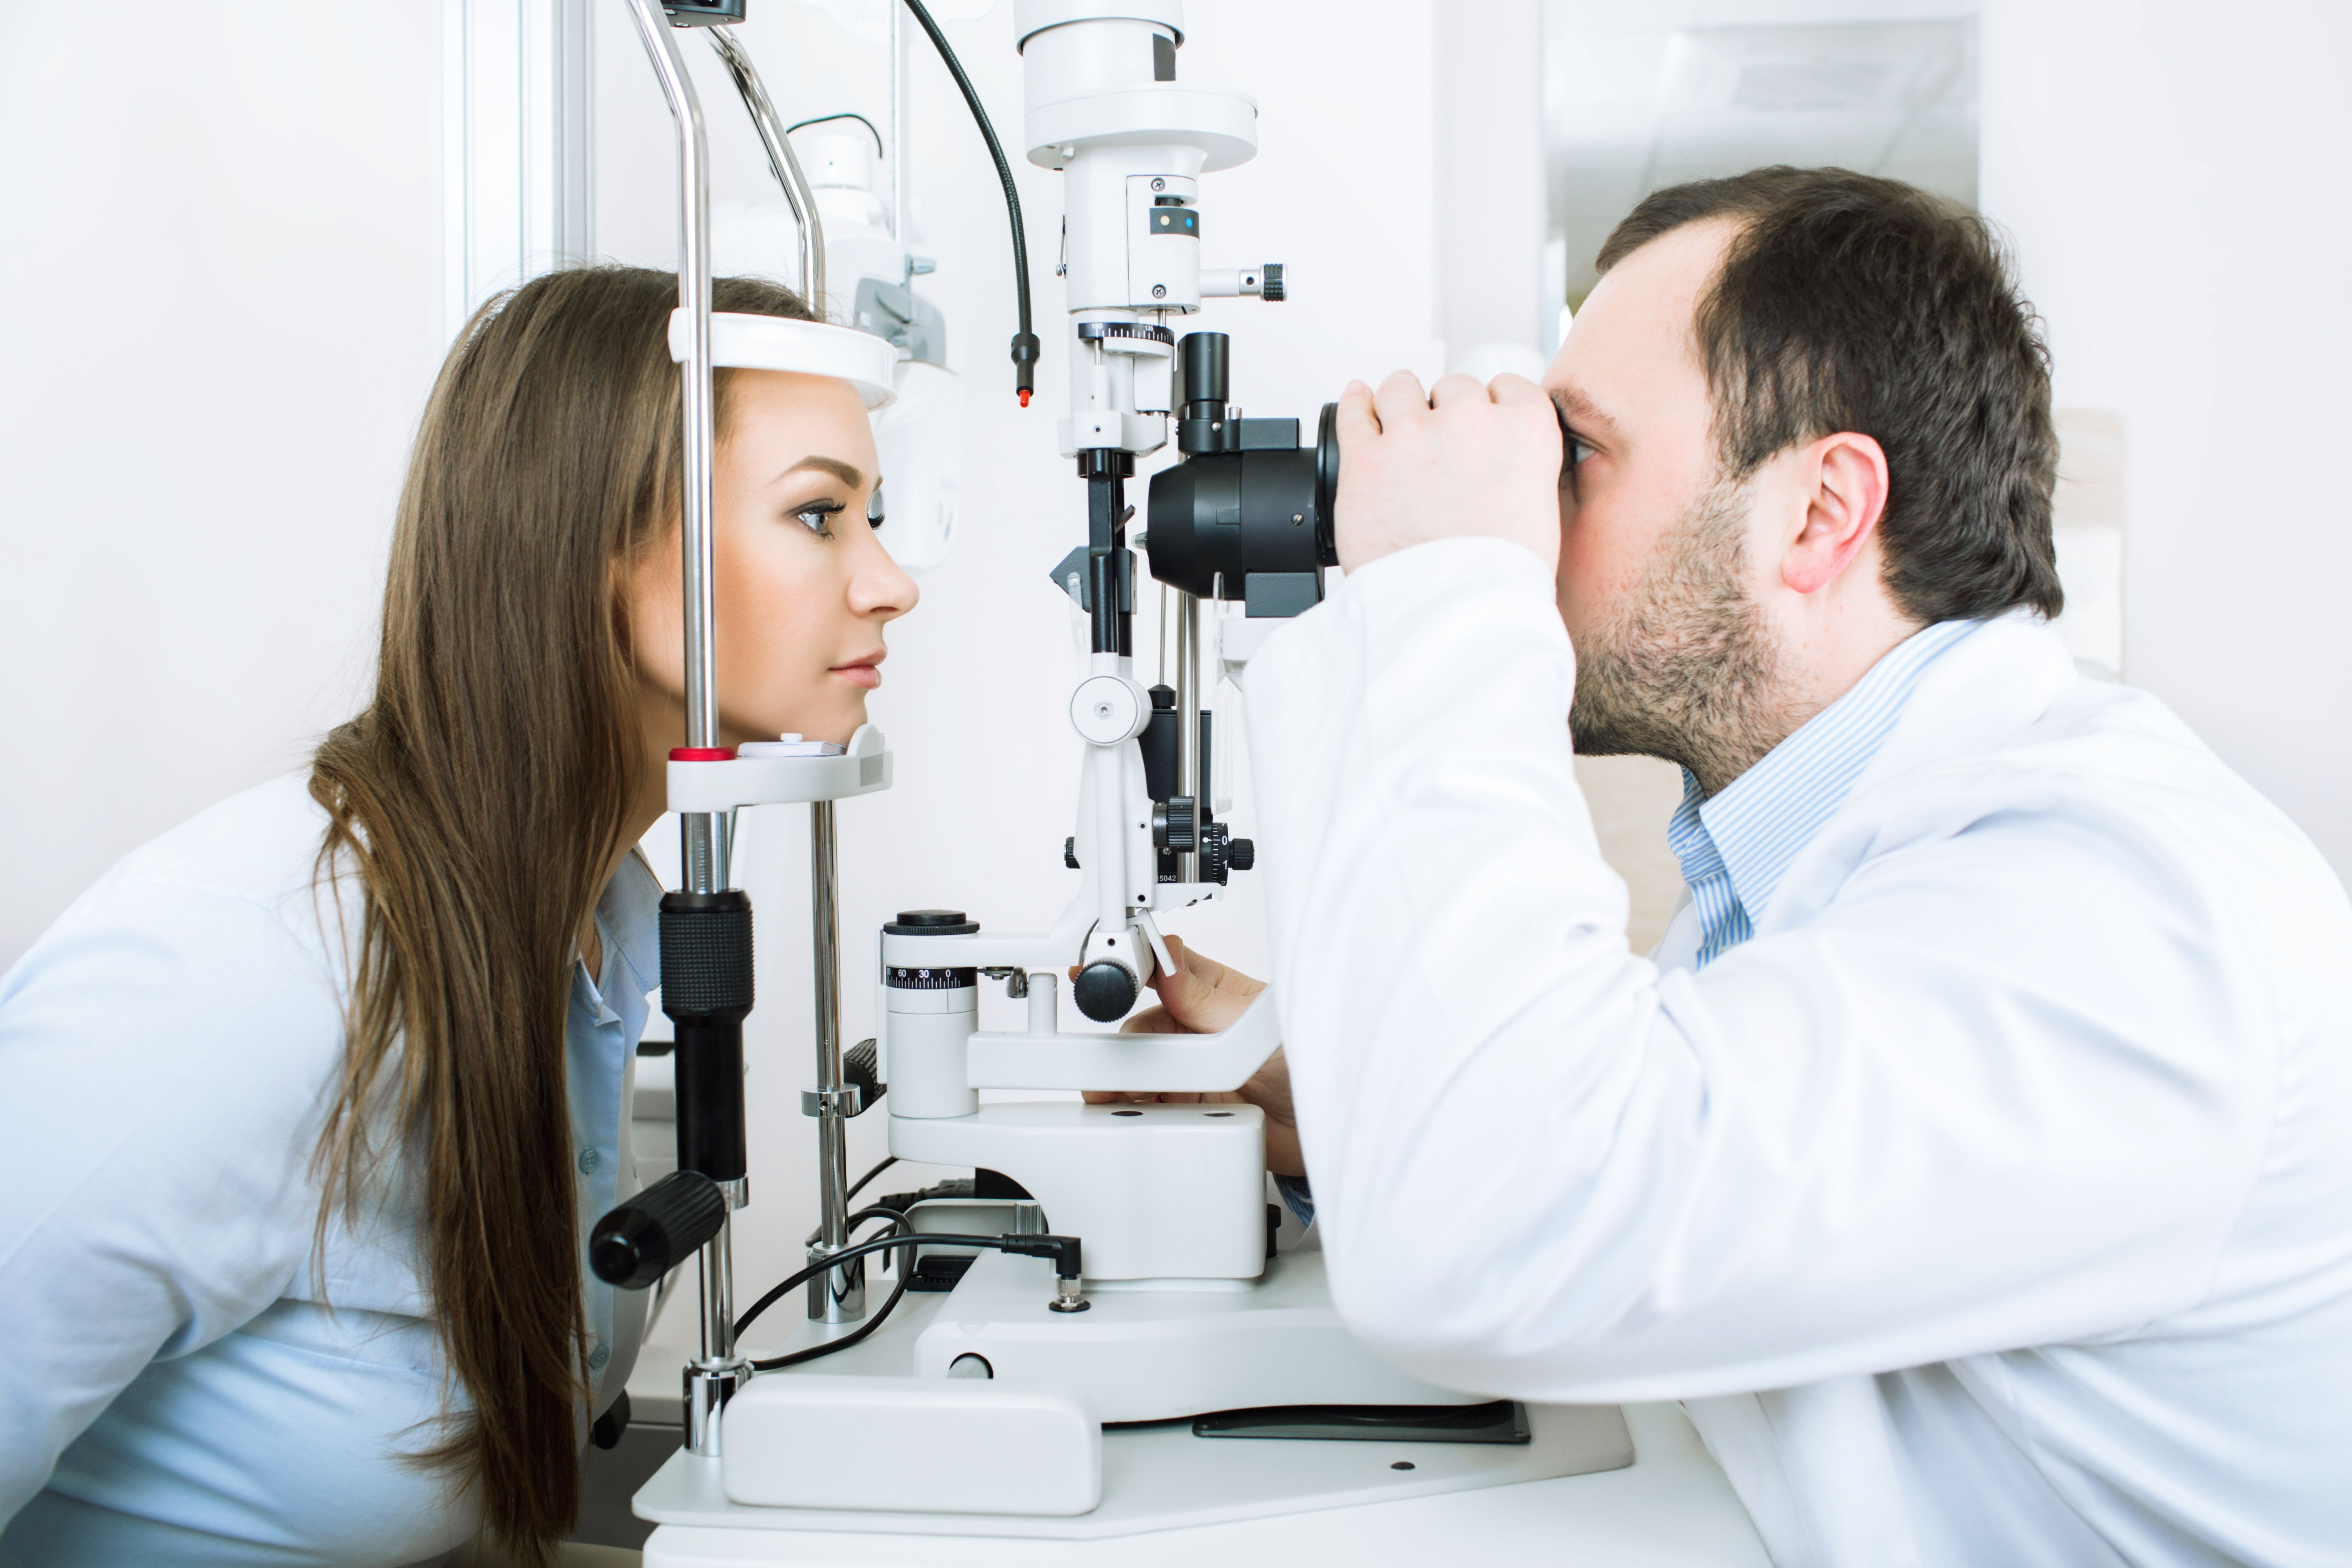 5 Things to Look for When Choosing a Good Eye Doctor